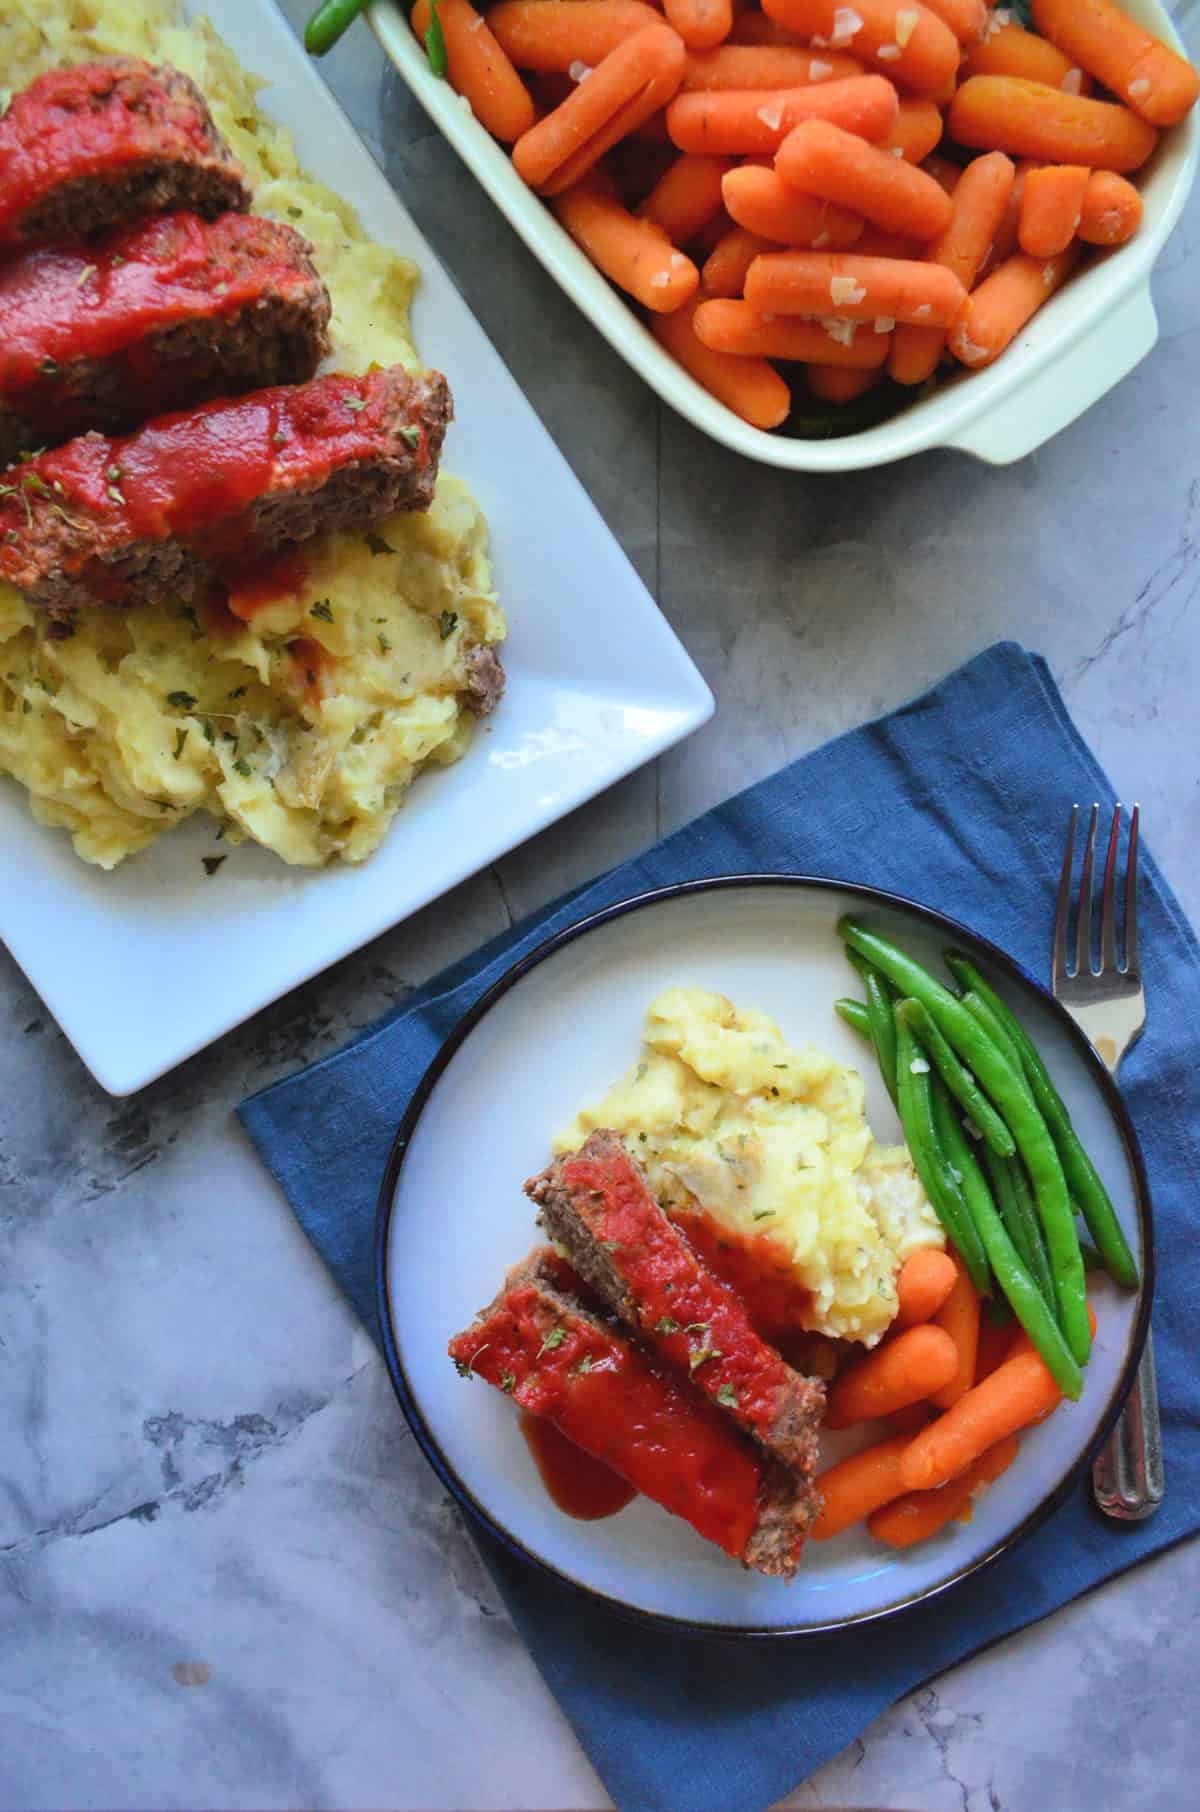 meatloaf platter next to dish of carrots by plate of both dishes with green beans.